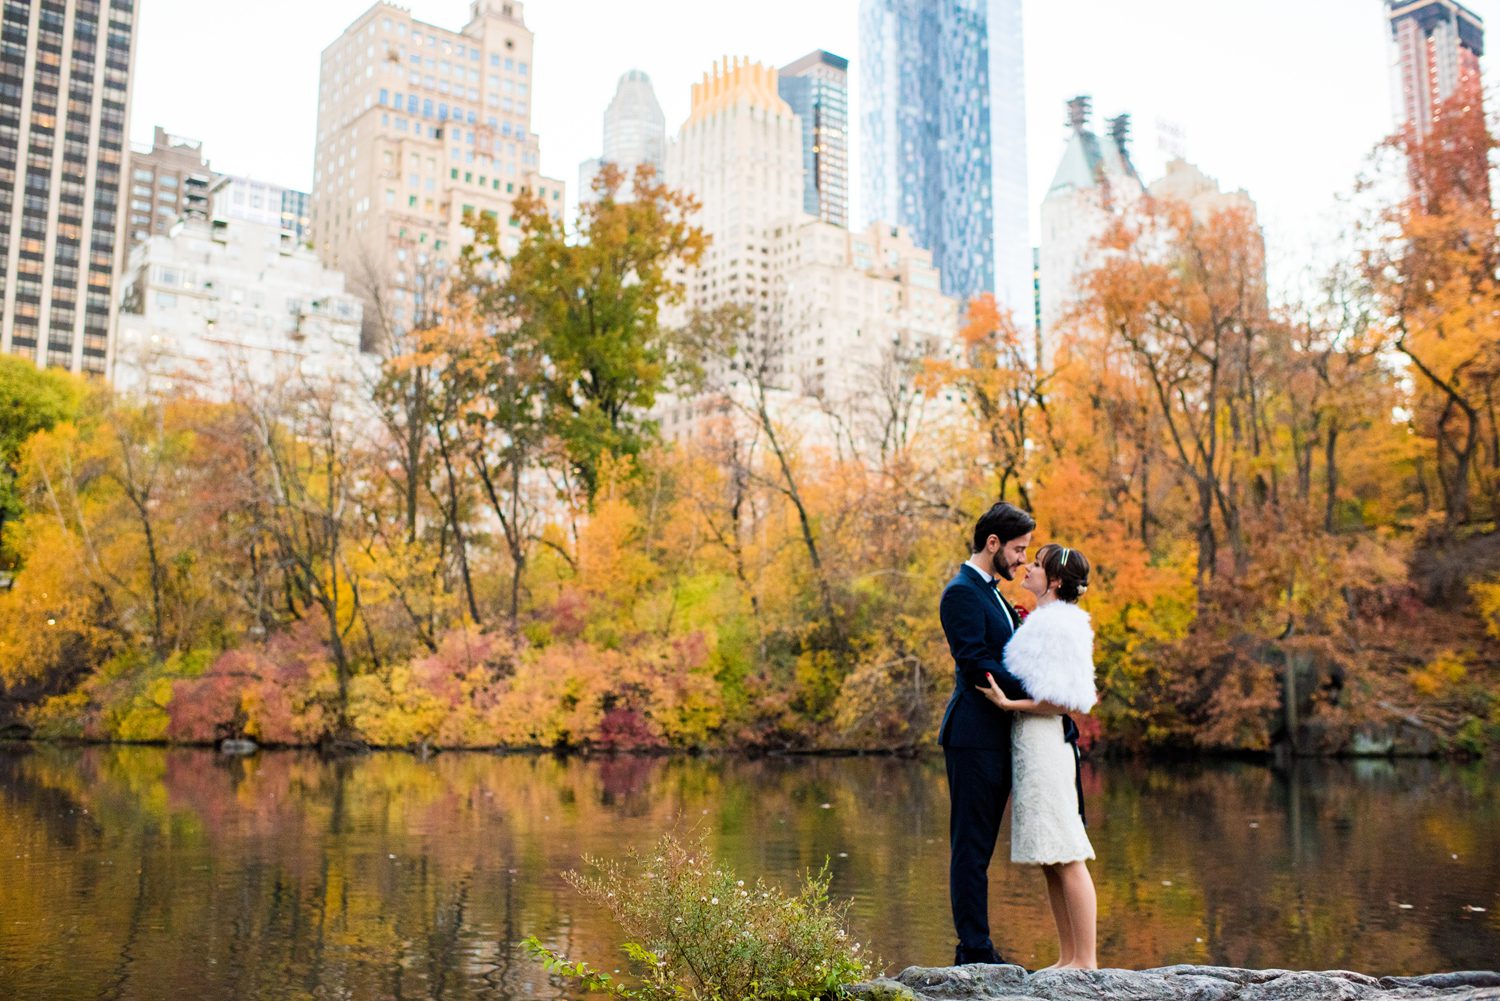 Autumn Wedding in Central Park NYC